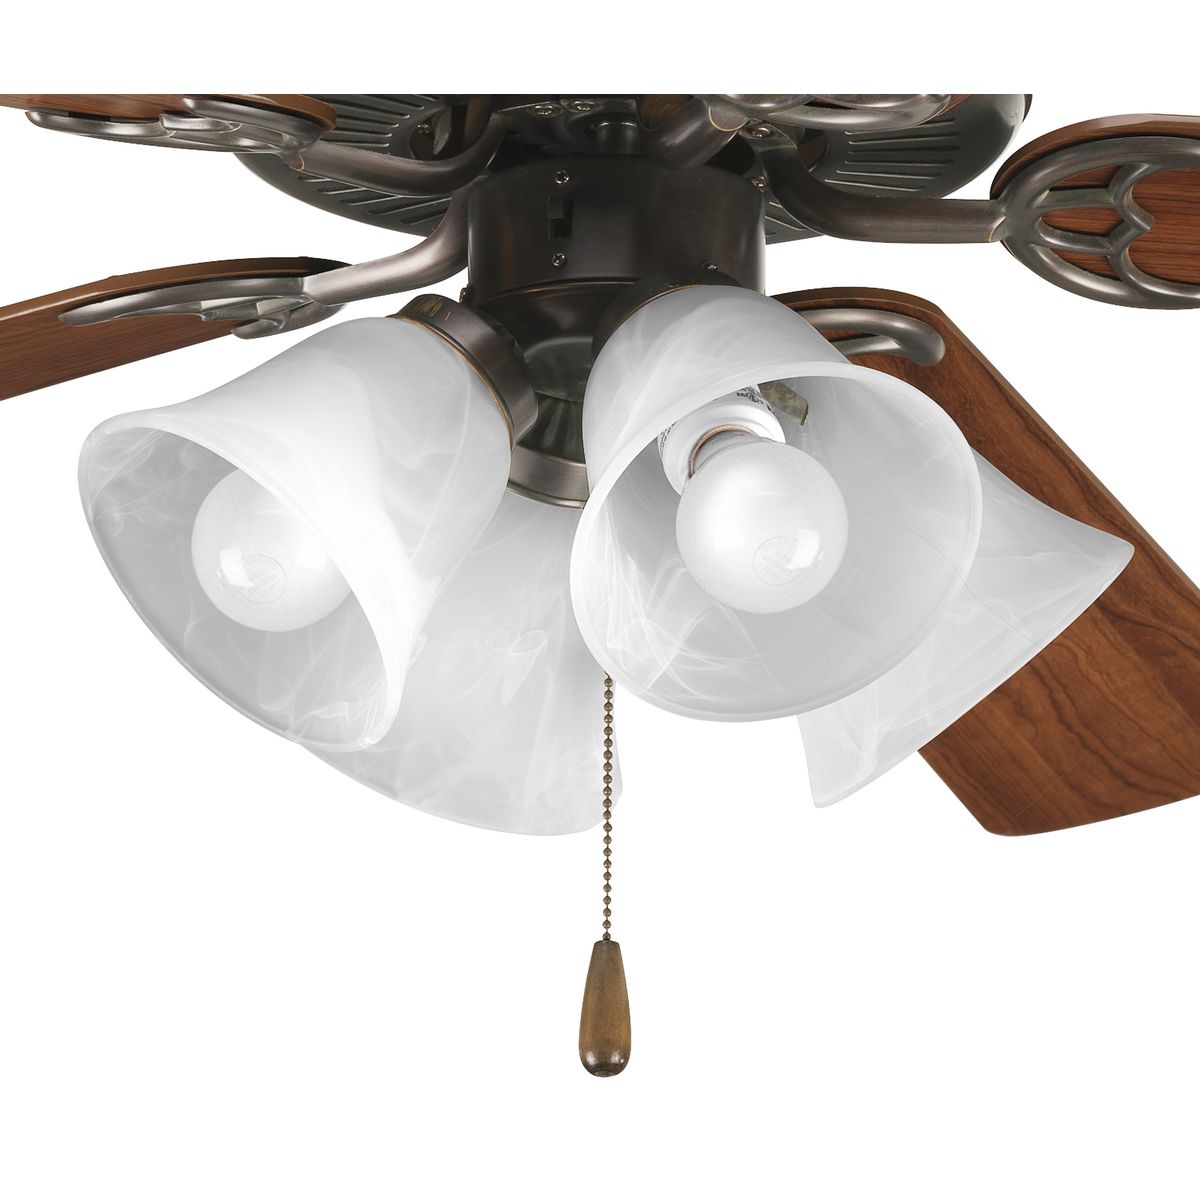 Four-light kit with white washed alabaster style glass shades beautiful in design. Innovative spring clip glass attachment system eliminates unsightly excess hardware. Good for use with P2500 and P2501 ceiling fans and includes quick connector for easy wiring. Includes four 3000K, 800 lumen each (source), Title 24 certified LED bulbs. Antique Bronze finish.